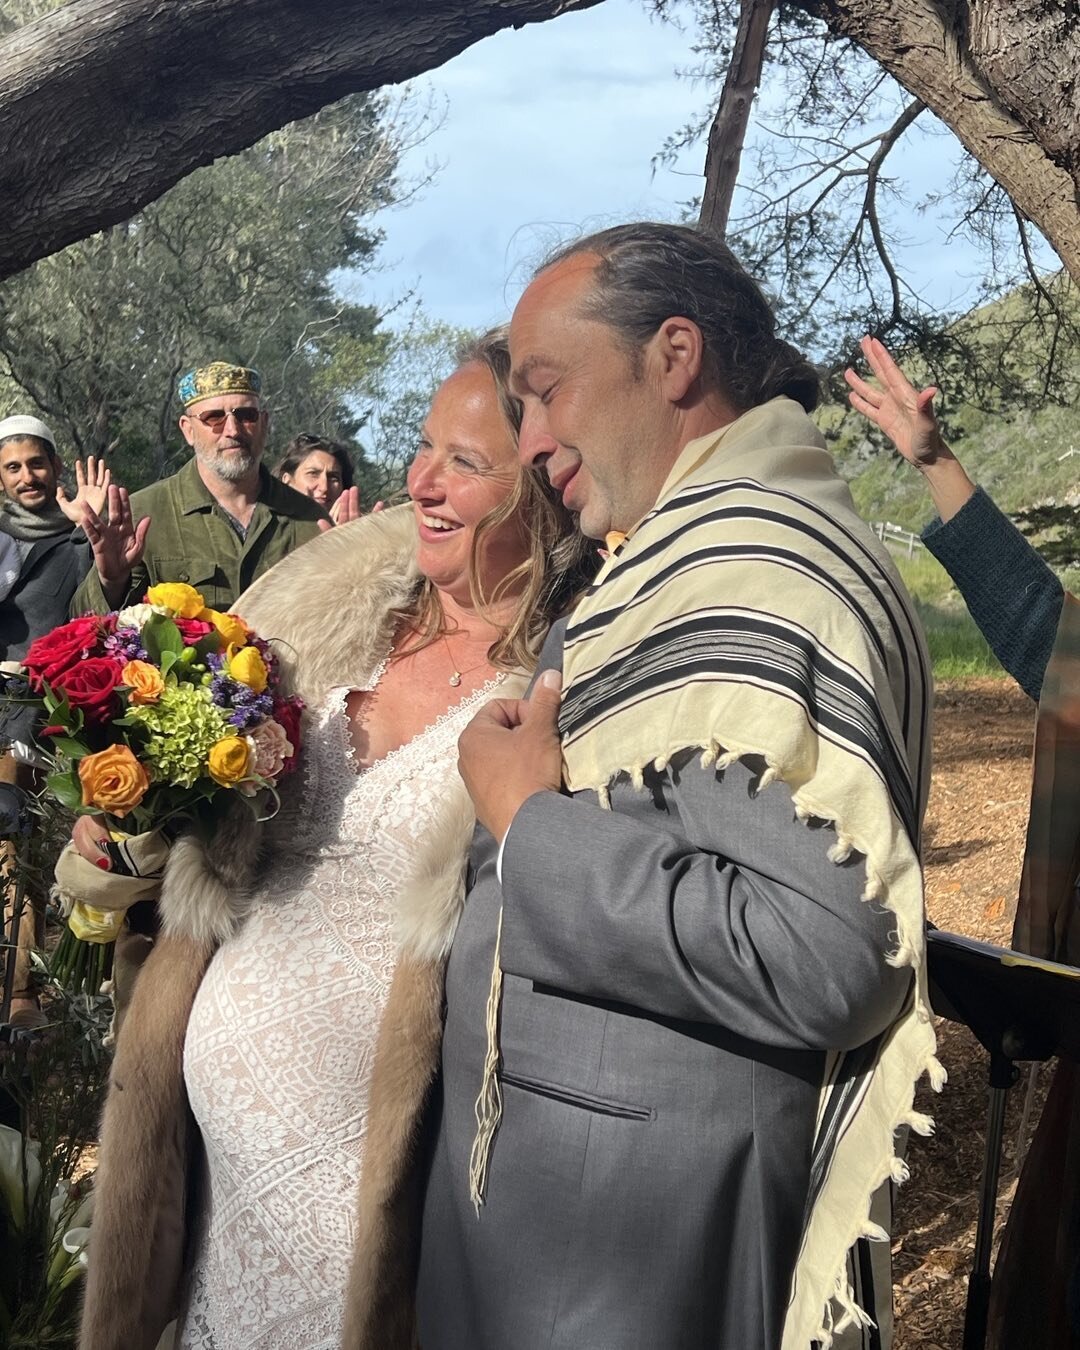 Epic wedding, an in-gathering of the Village. The Shtetl. So honored  be a shomeret (bride guard) with @shainanechama and hold a chuppah pole for beloved friend queen Jotifa @jotishephilevy and her beshert, Indra. More pics to come! #jewishwedding #f